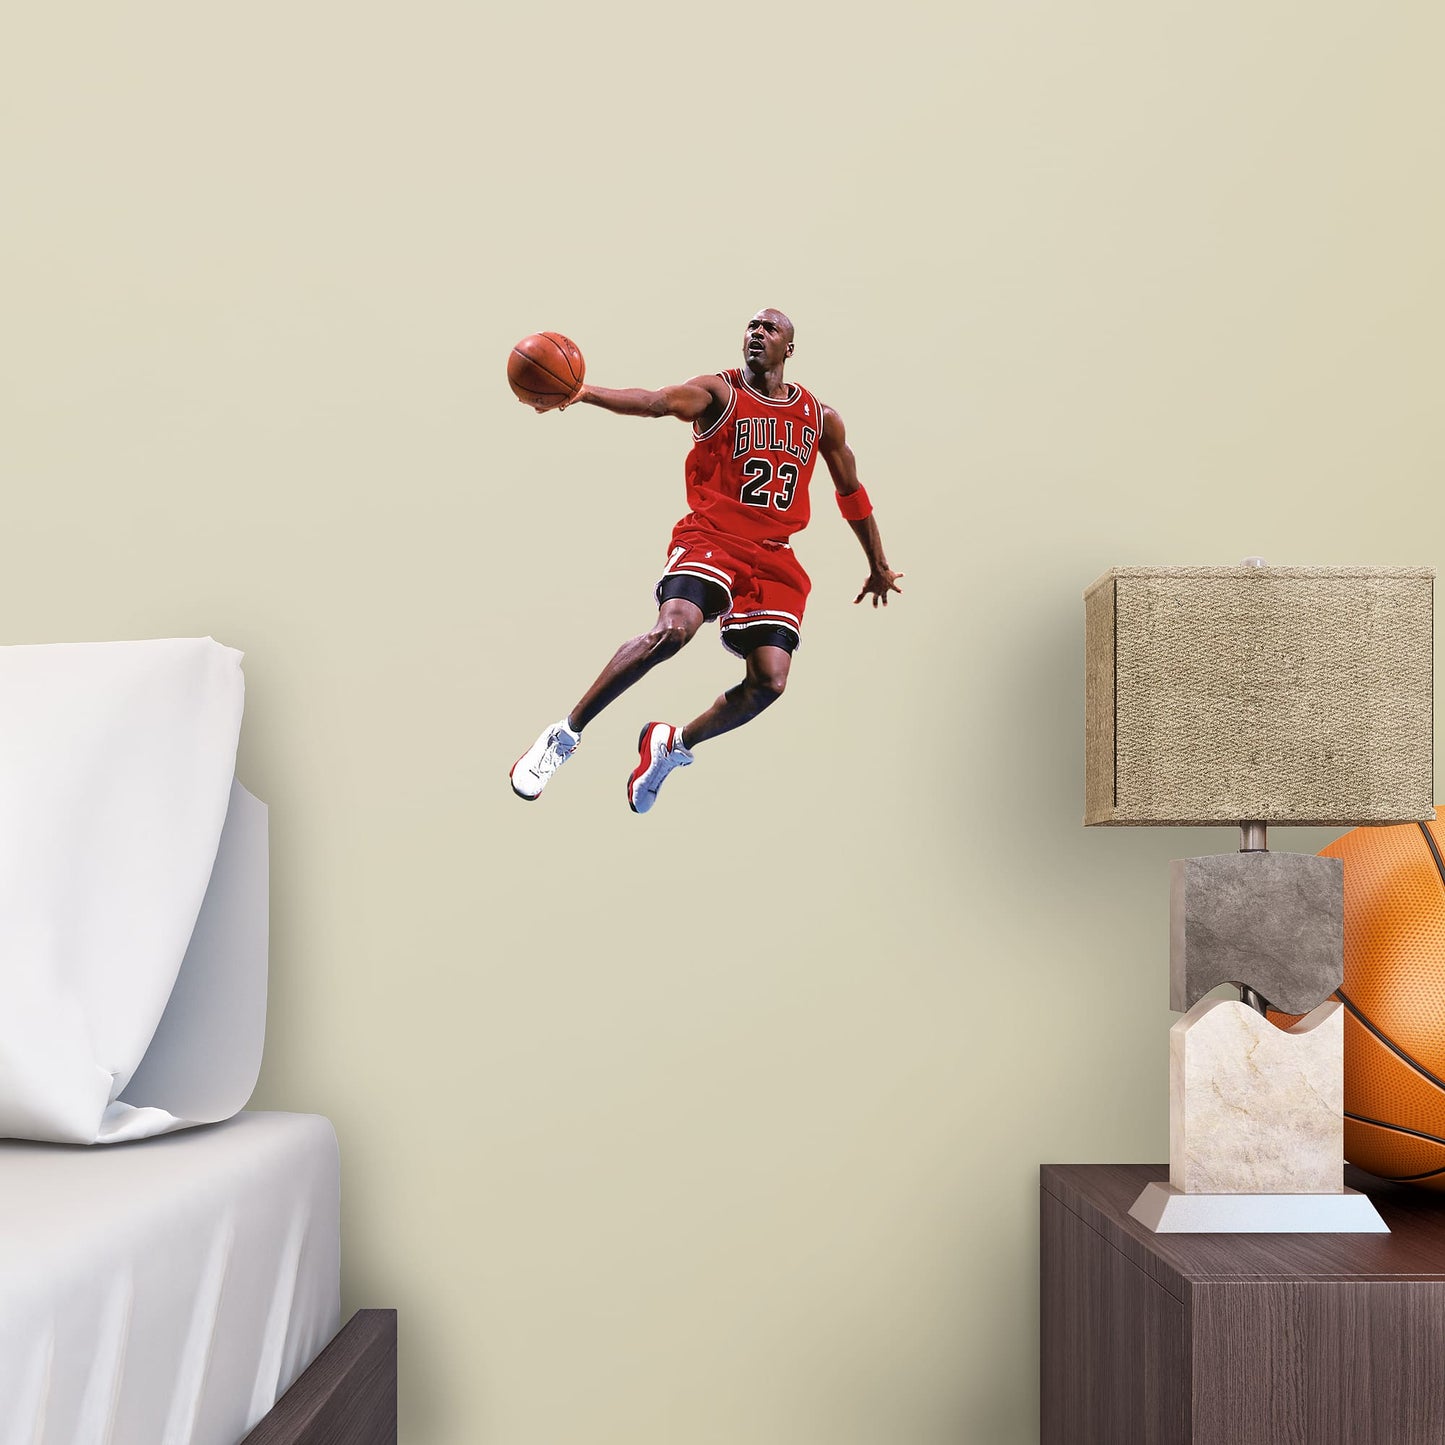 Michael Jordan - Officially Licensed NBA Removable Wall Decal